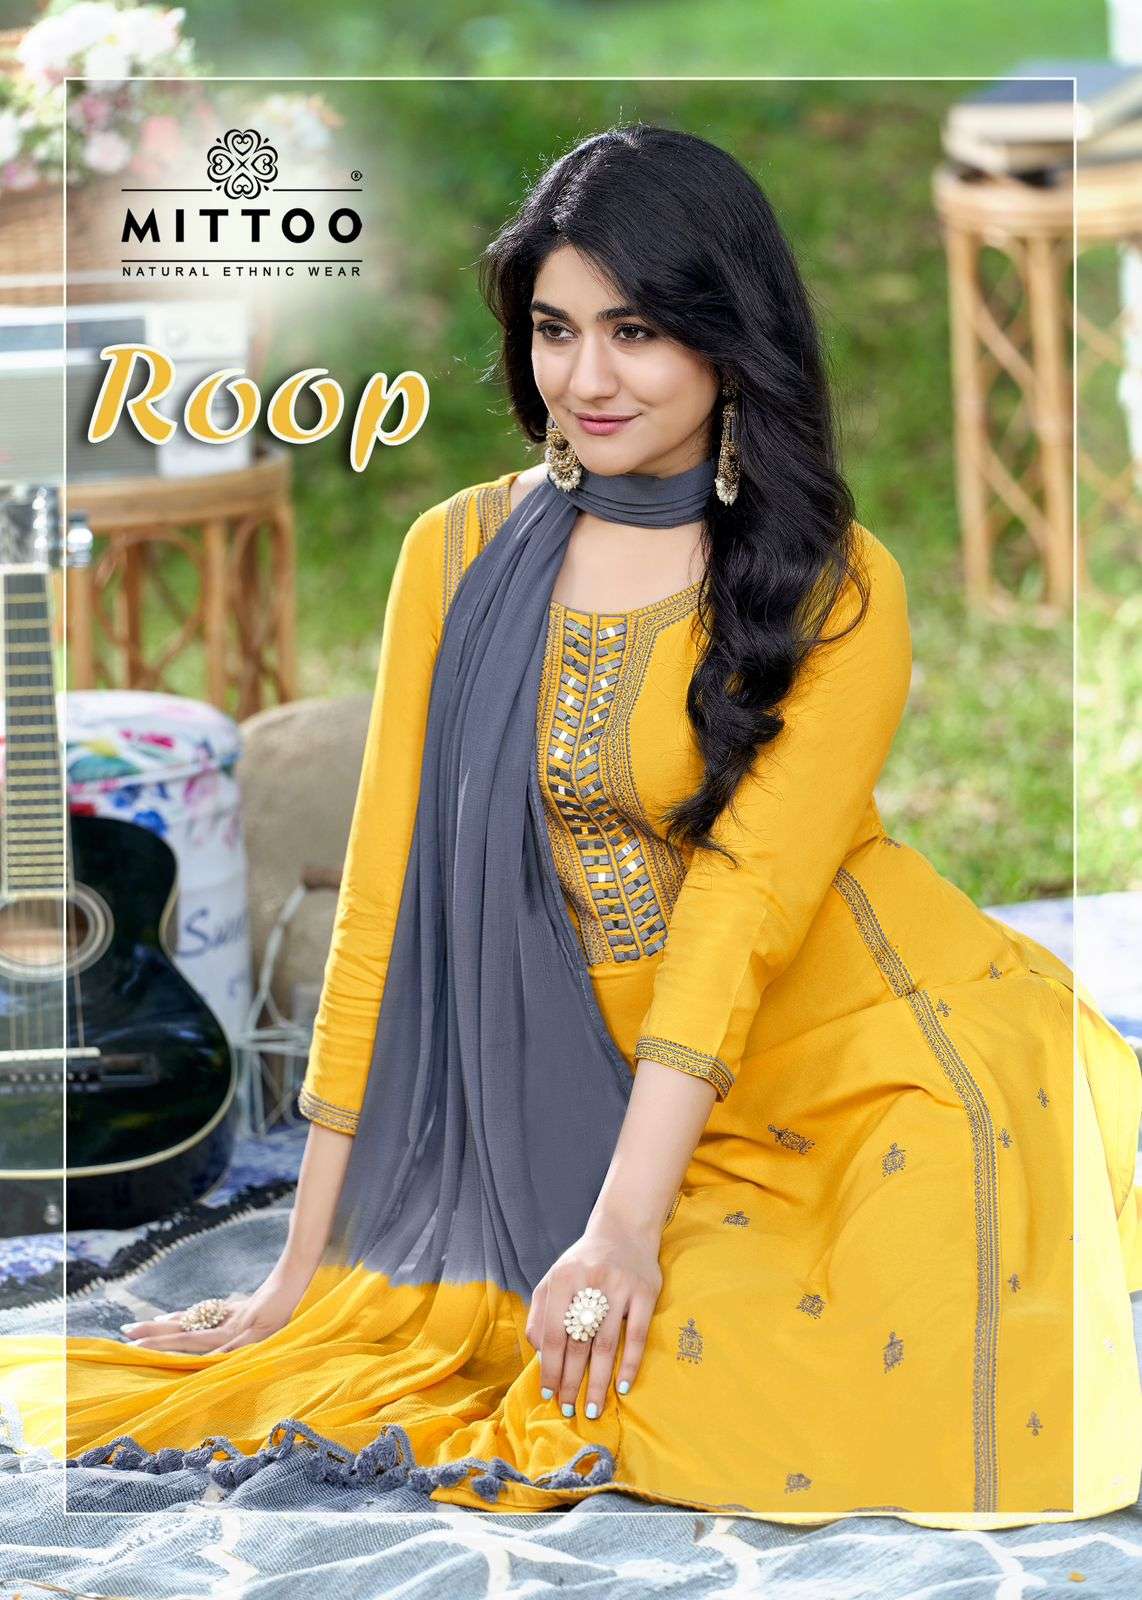 ROOP HEAVY RAYON EMBROIDERY AND HANDWORK KURTI WITH PANT AND NAZMIN CHIFFON DUPATTA BY MITTOO BRAND ...